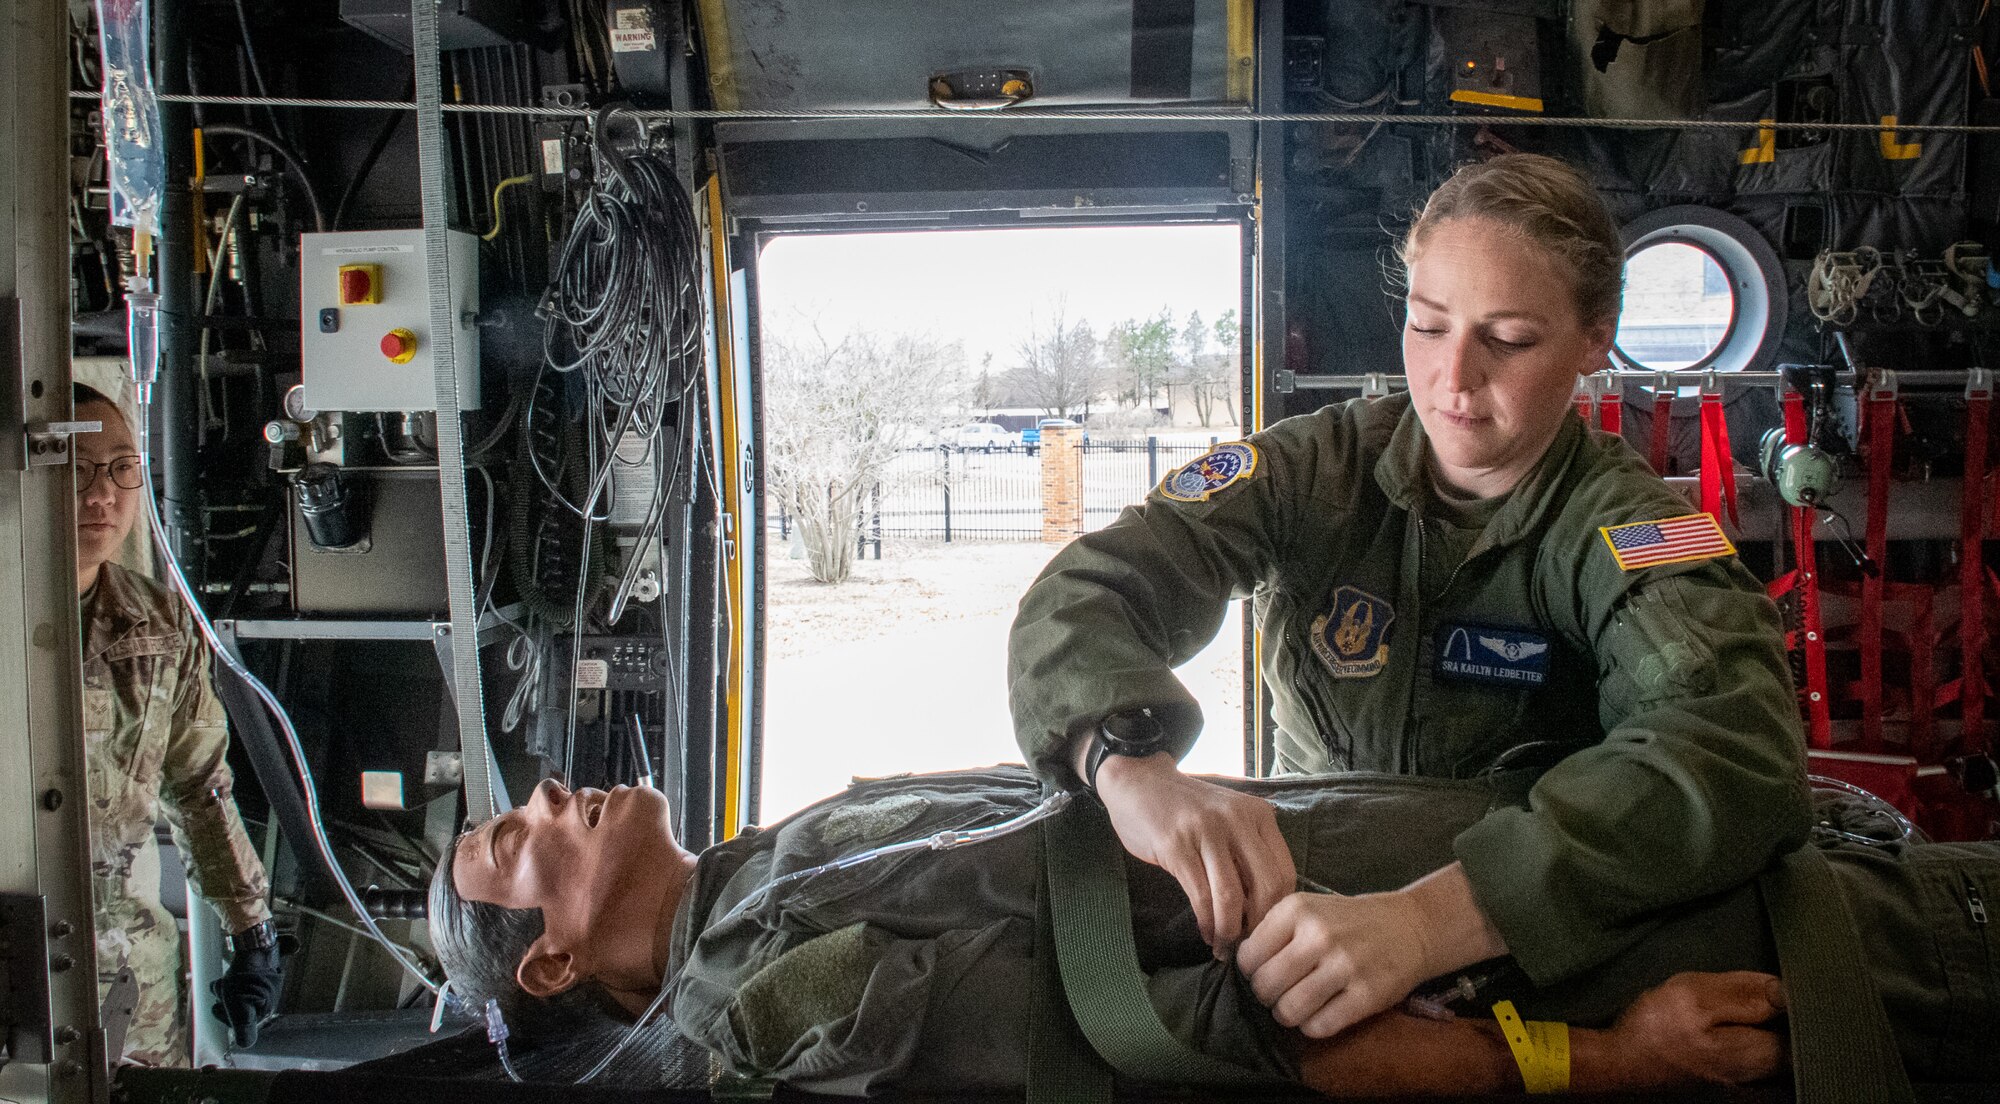 Senior Airman Katlyn Ledbetter, 932nd Aeromedical Evacuation Squadron AE technician, trains fellow AE technician Senior Airman Tiffany Tsui on in-flight medical care procedures and the administration of intravenous fluids on a medical training mannequin.